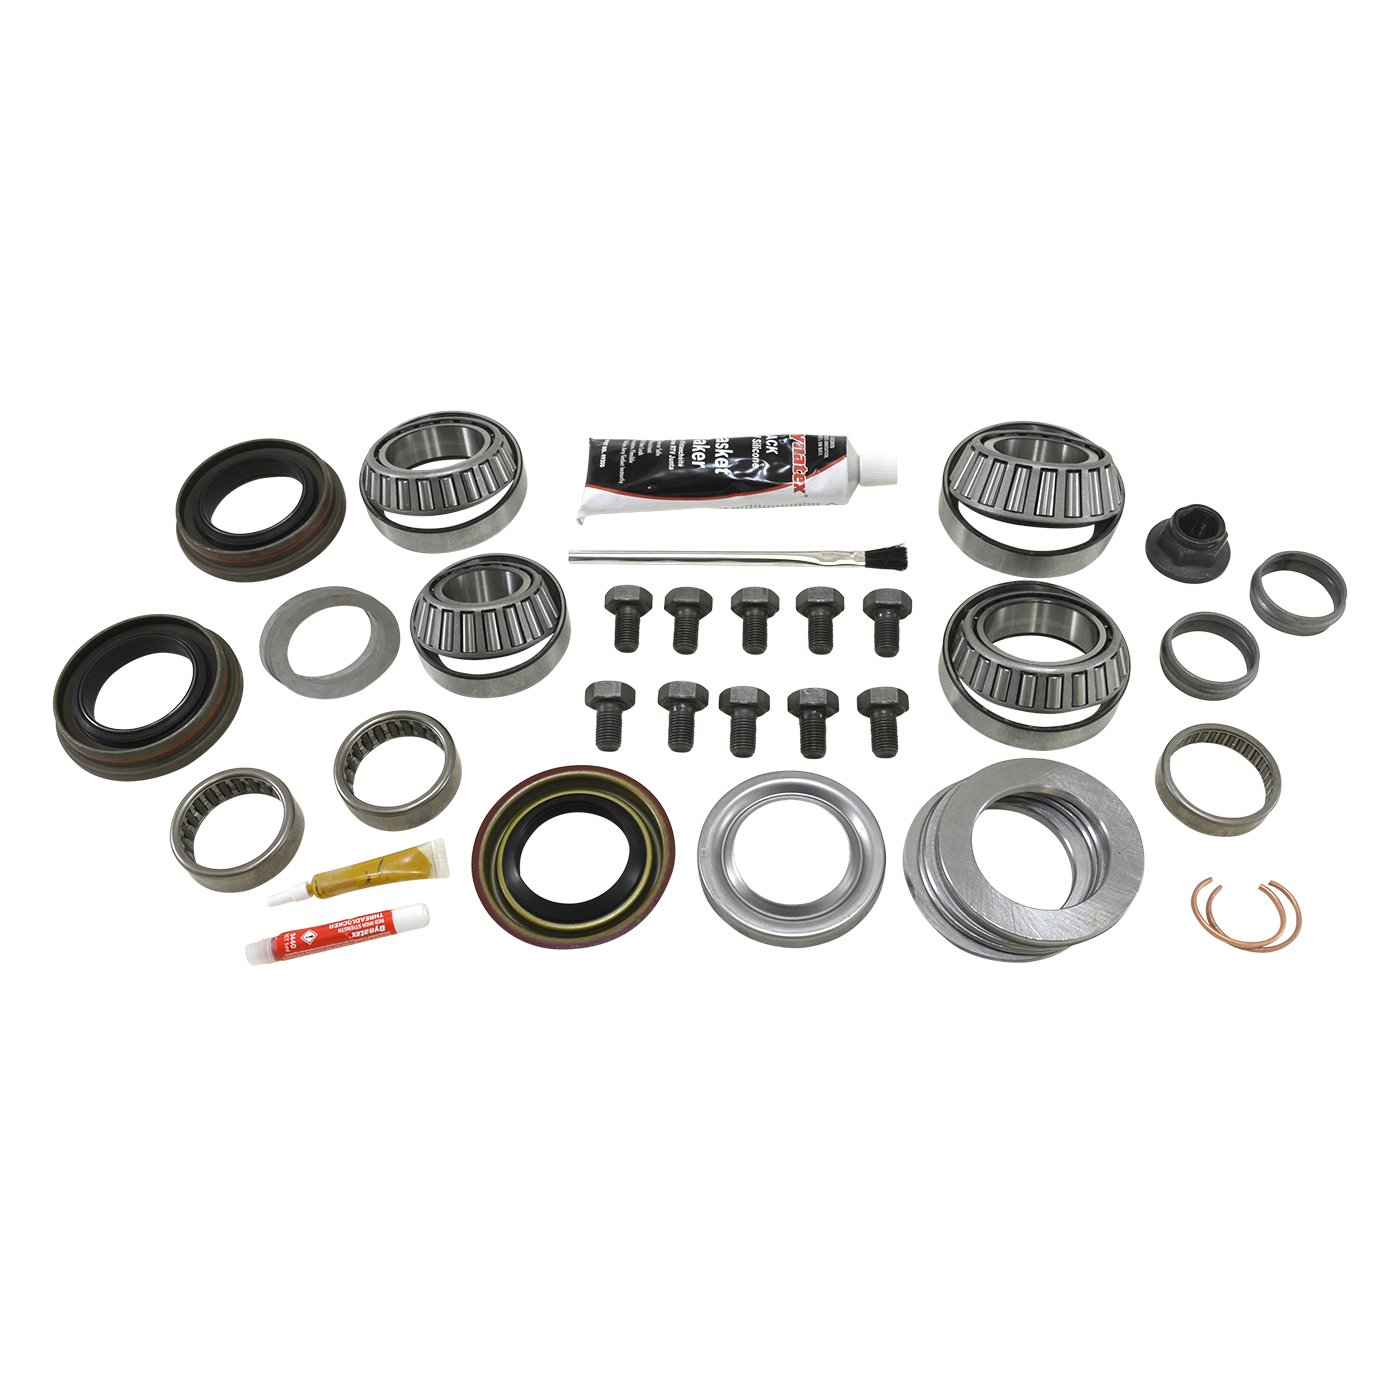 USA Standard 37117 Master Overhaul Kit, For The 2009 & Up Ford 8.8 in. Ifs Differential